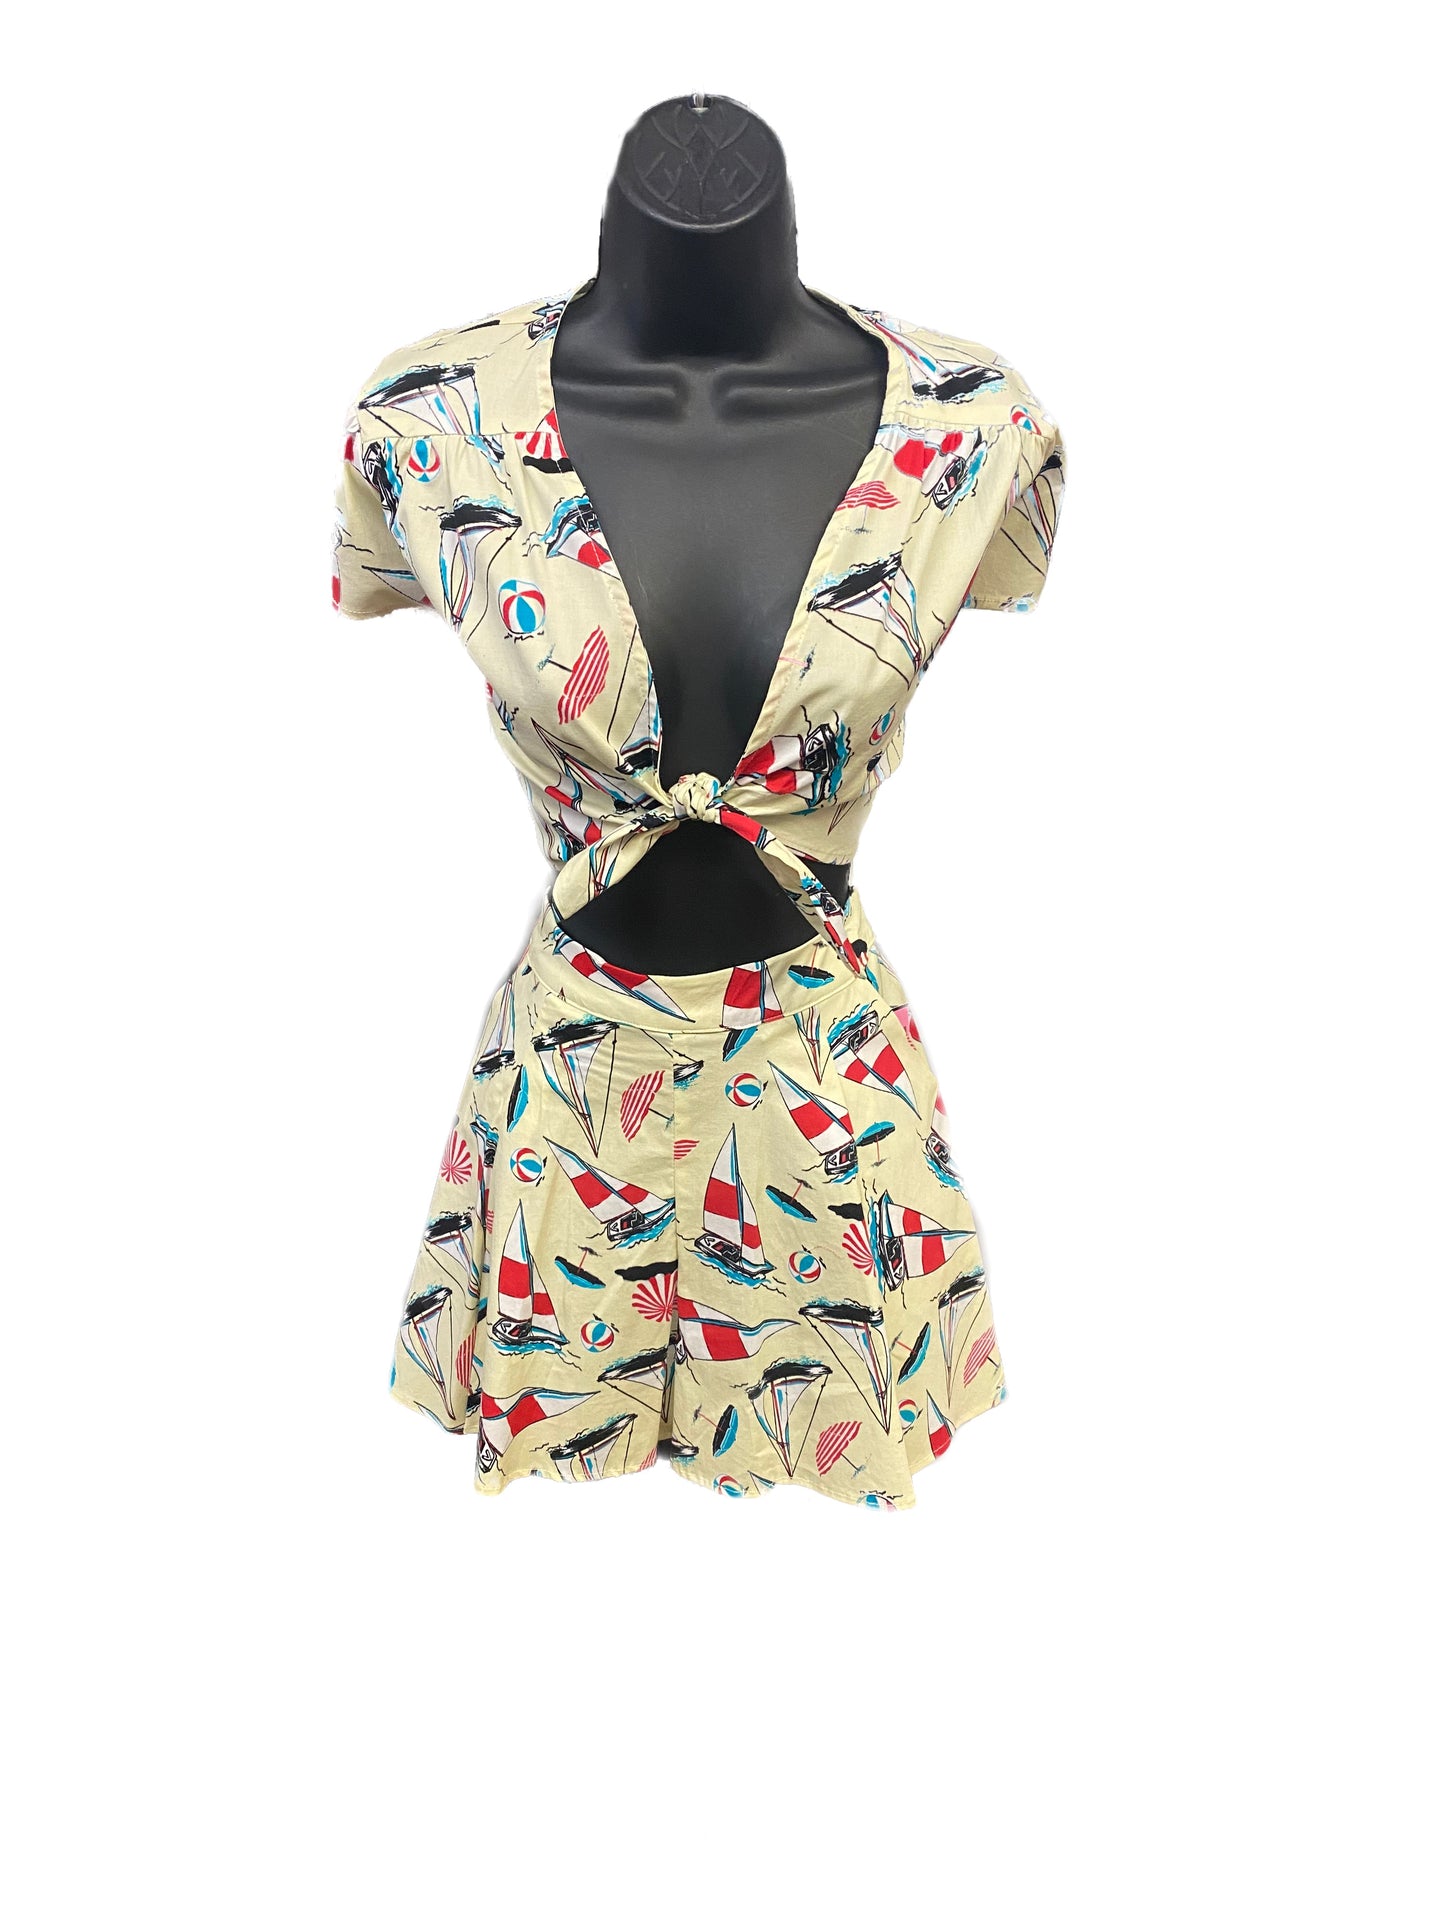 1930's Style Dance Swing Skorts with Nautical Design by Betty Page